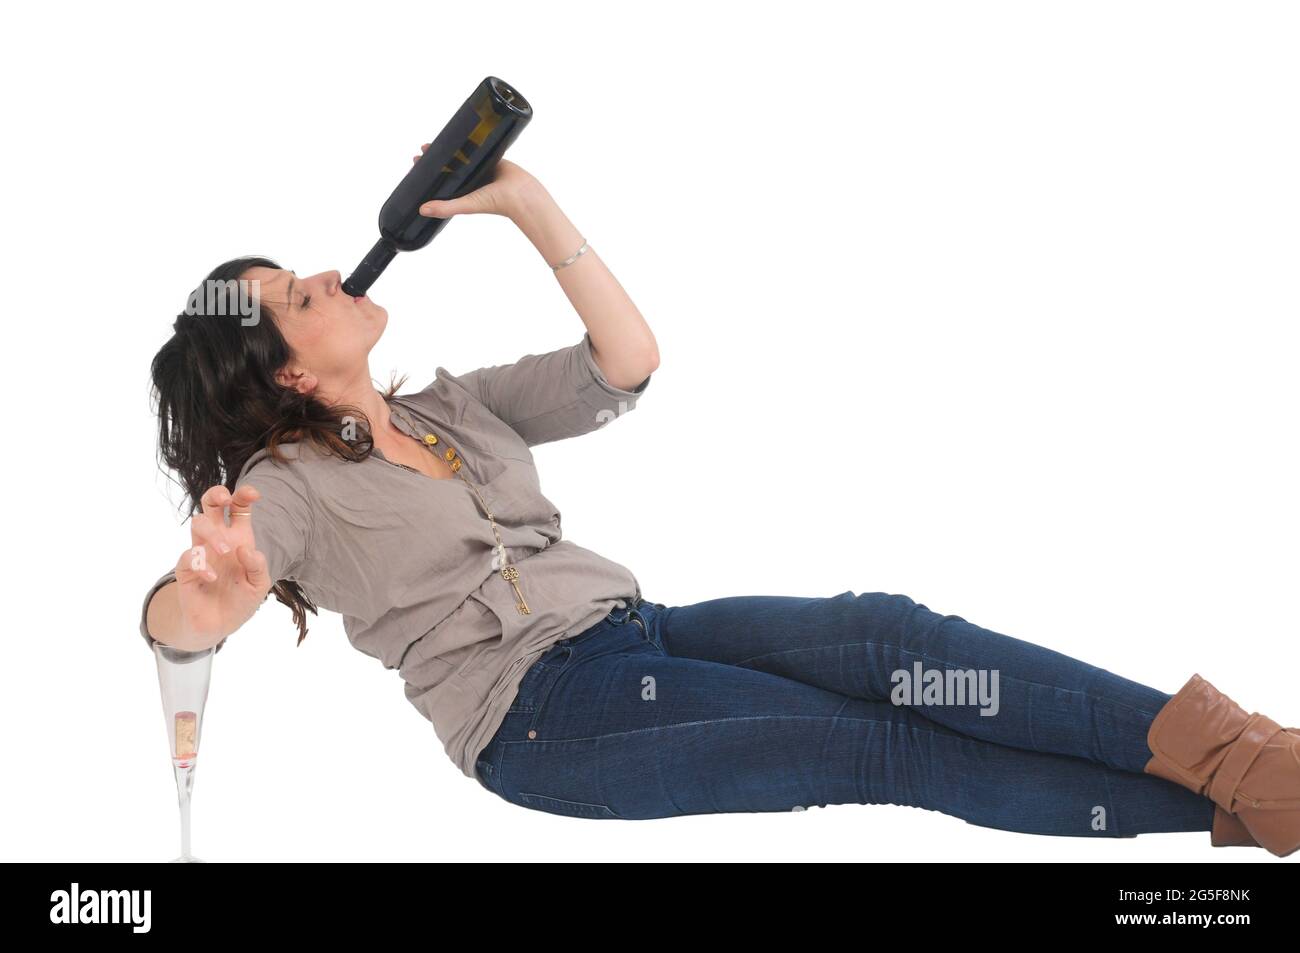 young woman prefers drinking her red wine straight out of the bottle for quicker and cleaner results studio shot on white background Stock Photo